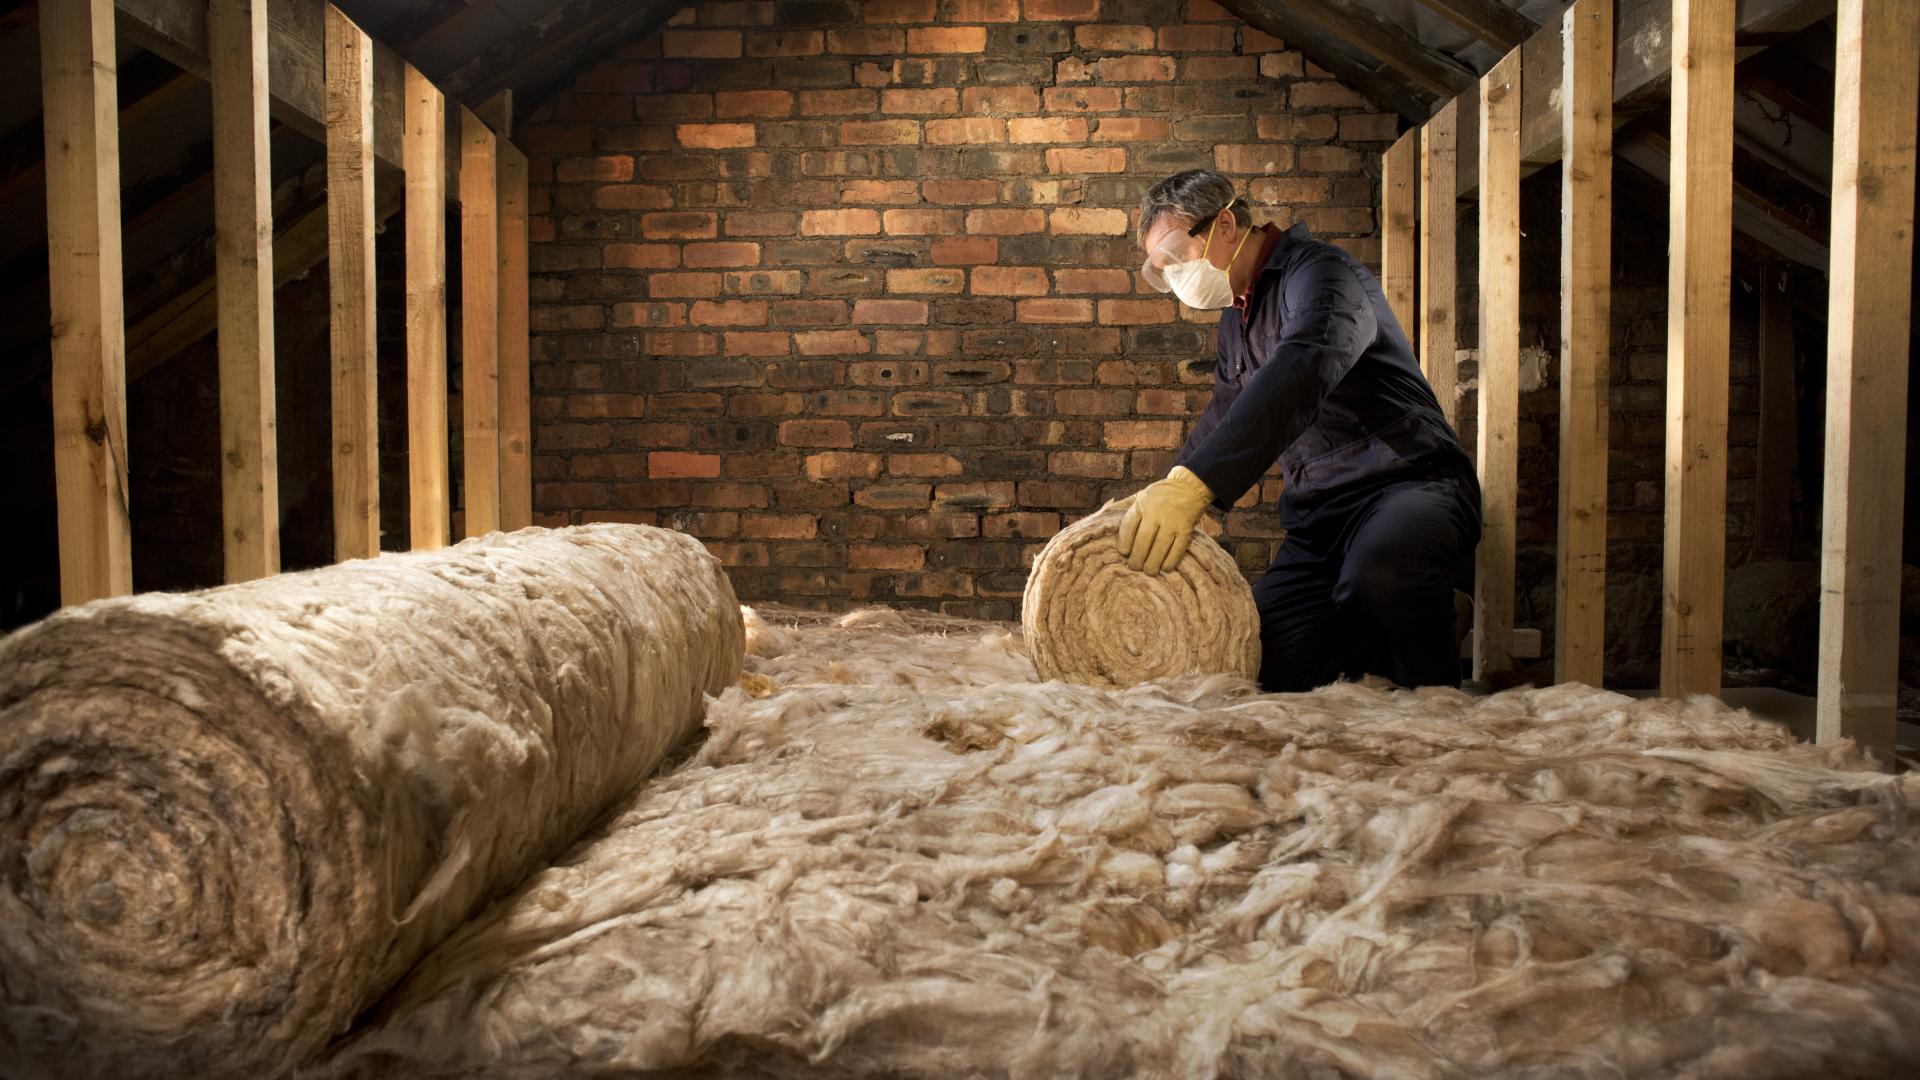 A man is rolling insulation out on the floor of a loft